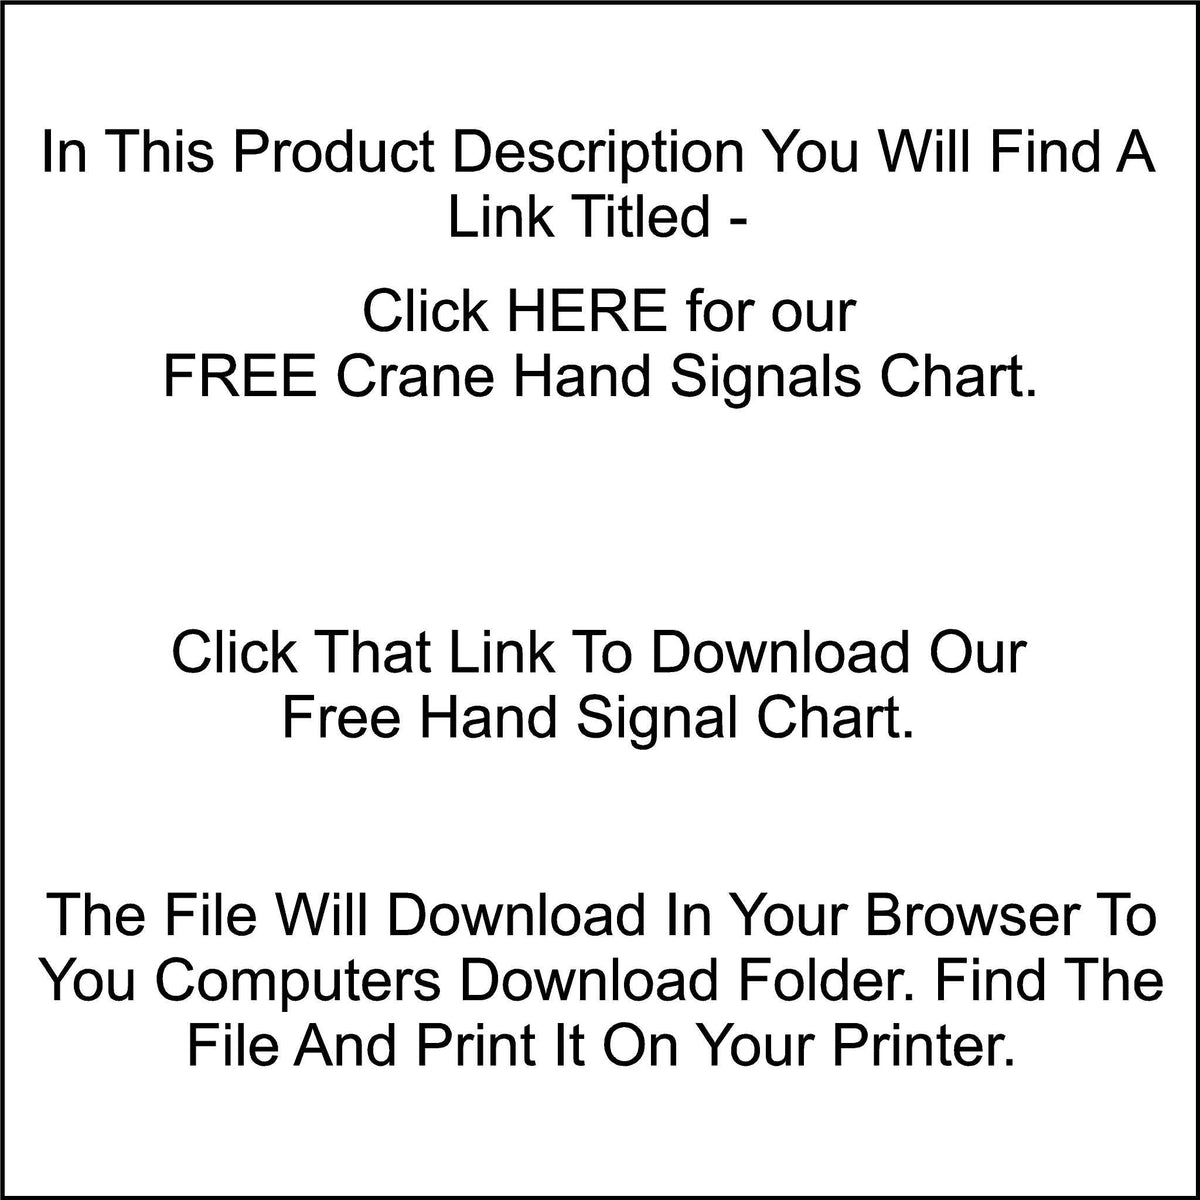 Directions on how to download and print our free hand signal chart.